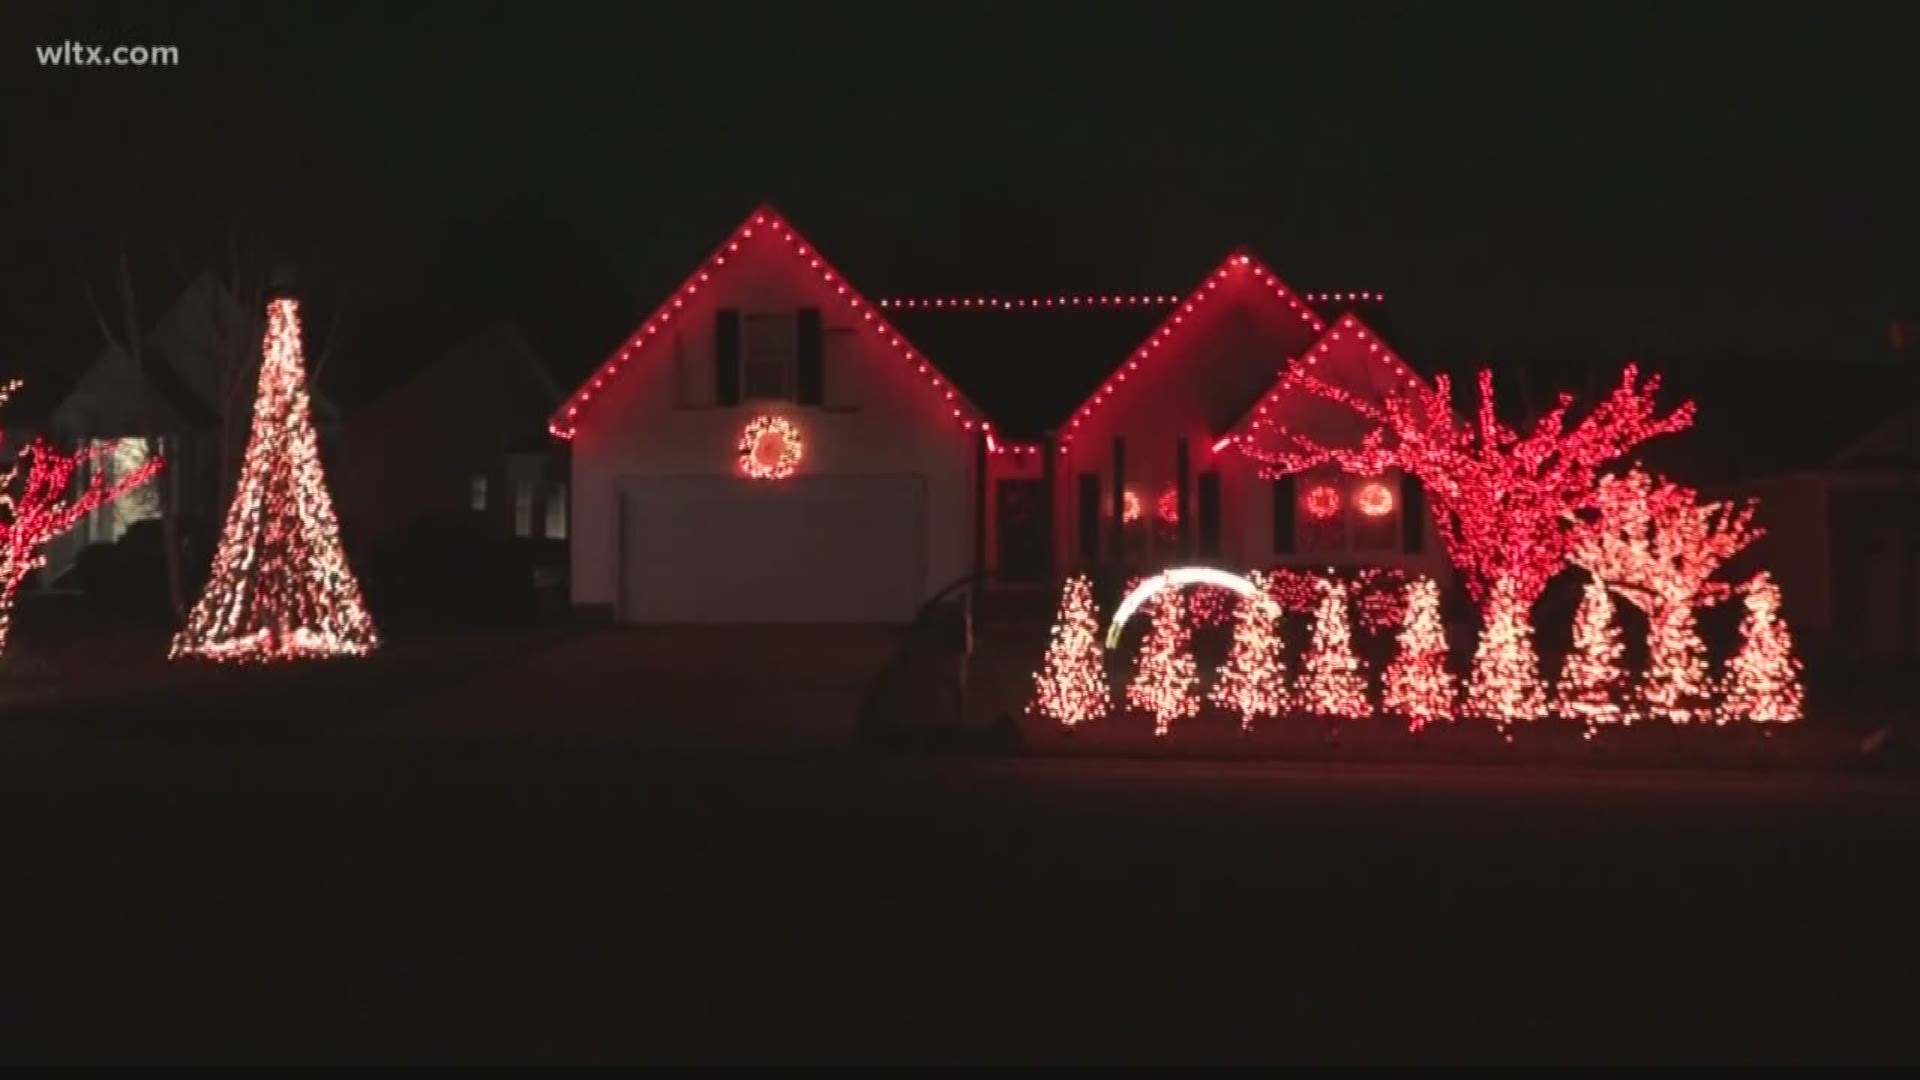 Its 3 weeks from Christmas and if you're not in the mood, these lights may help lift your spirits.   The Hite family in Lexington has a decade long tradition